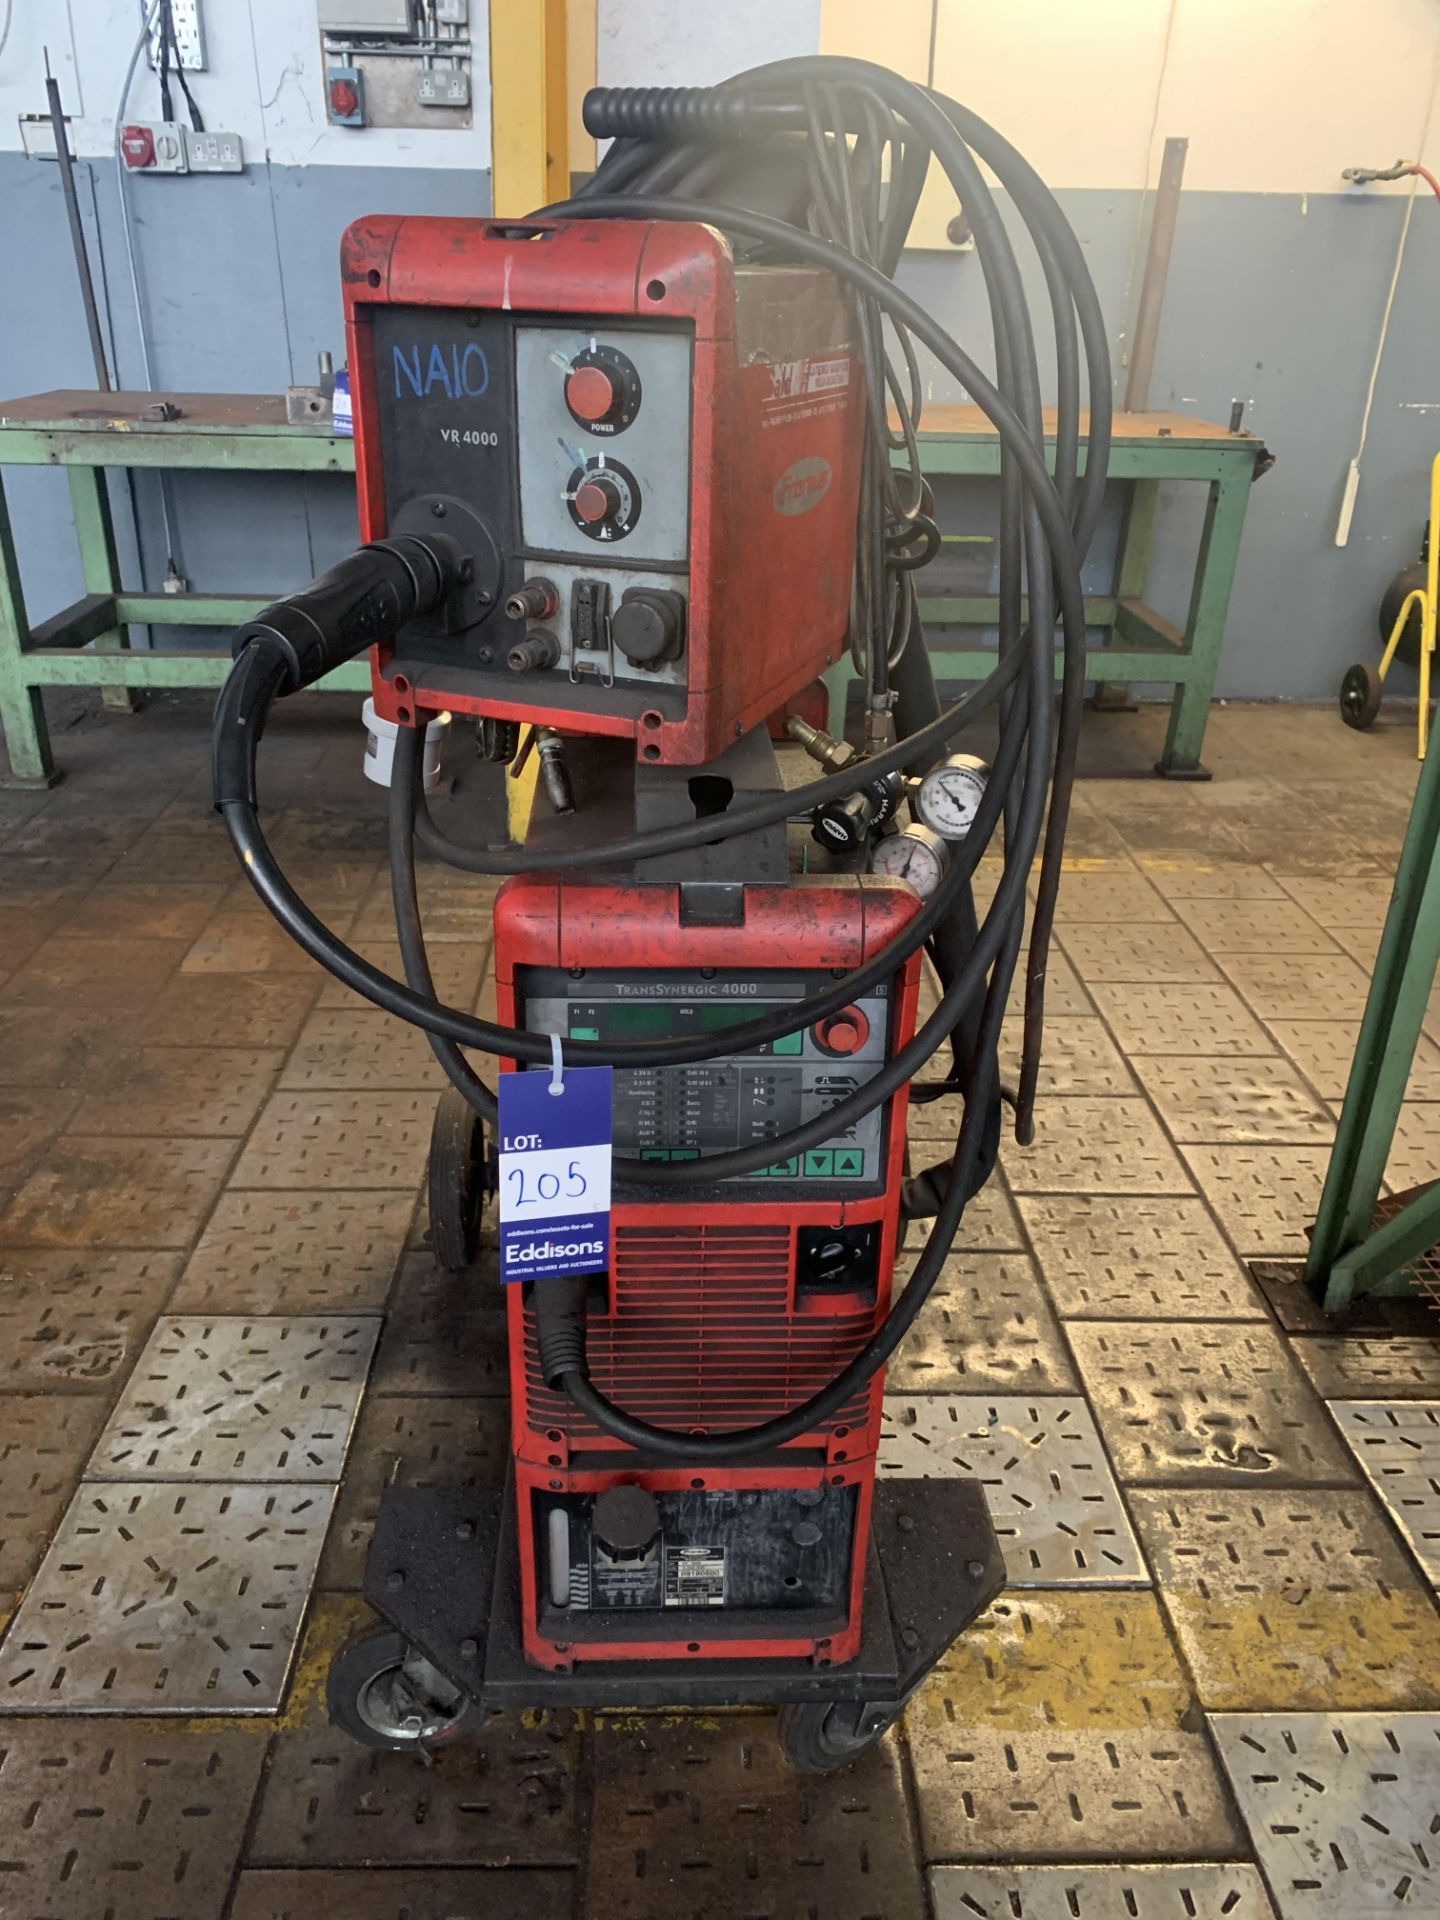 Fronius Transyergic 4000 Mig Welder with VR 4000 Wire Feed. - Image 3 of 5